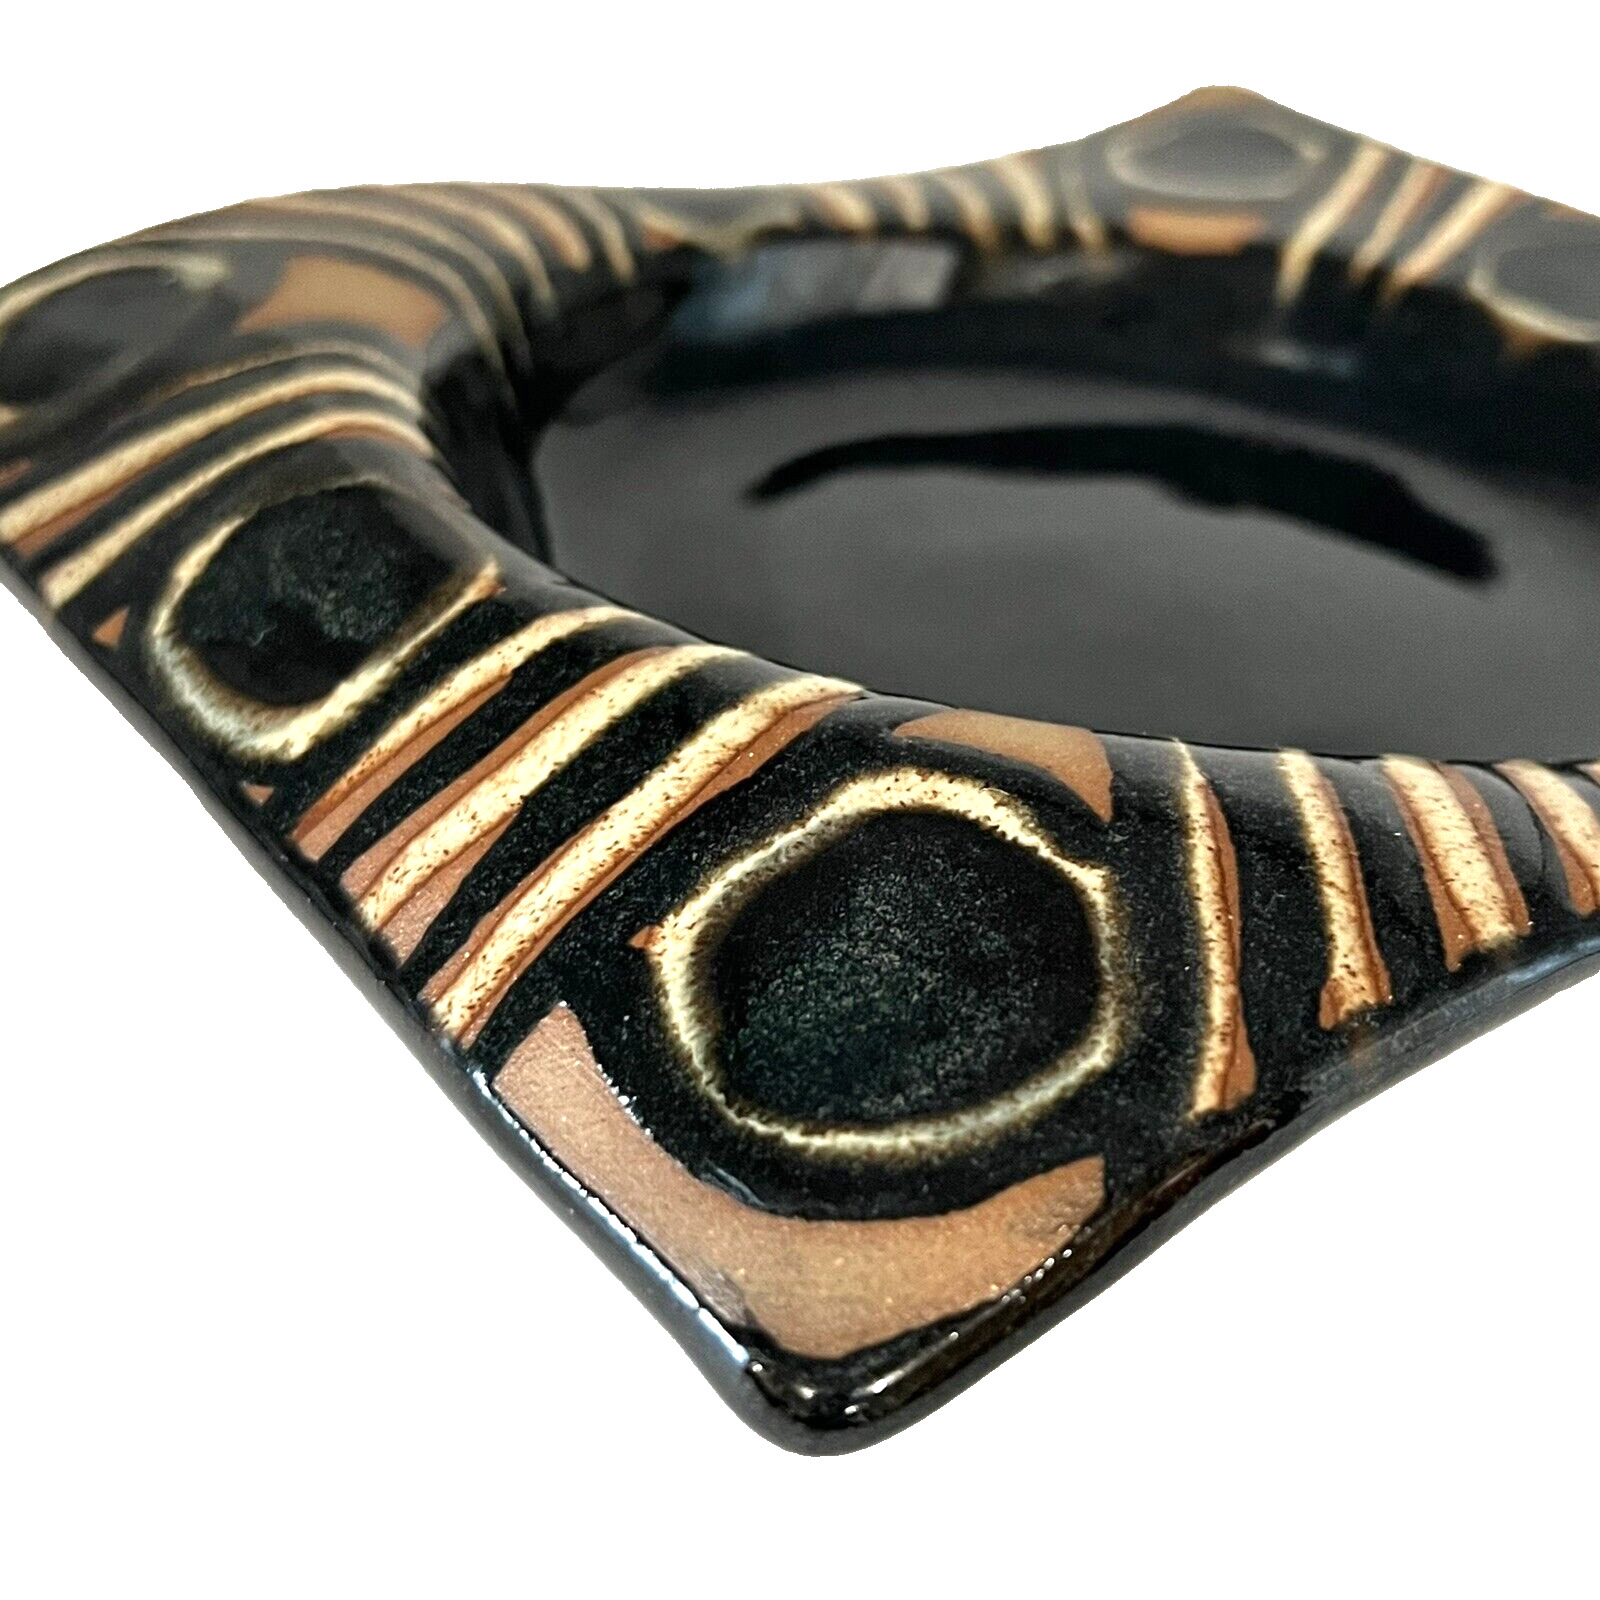 Black & Brown Circle Striped Design Wavy Shallow Pottery Bowl Artist Signed